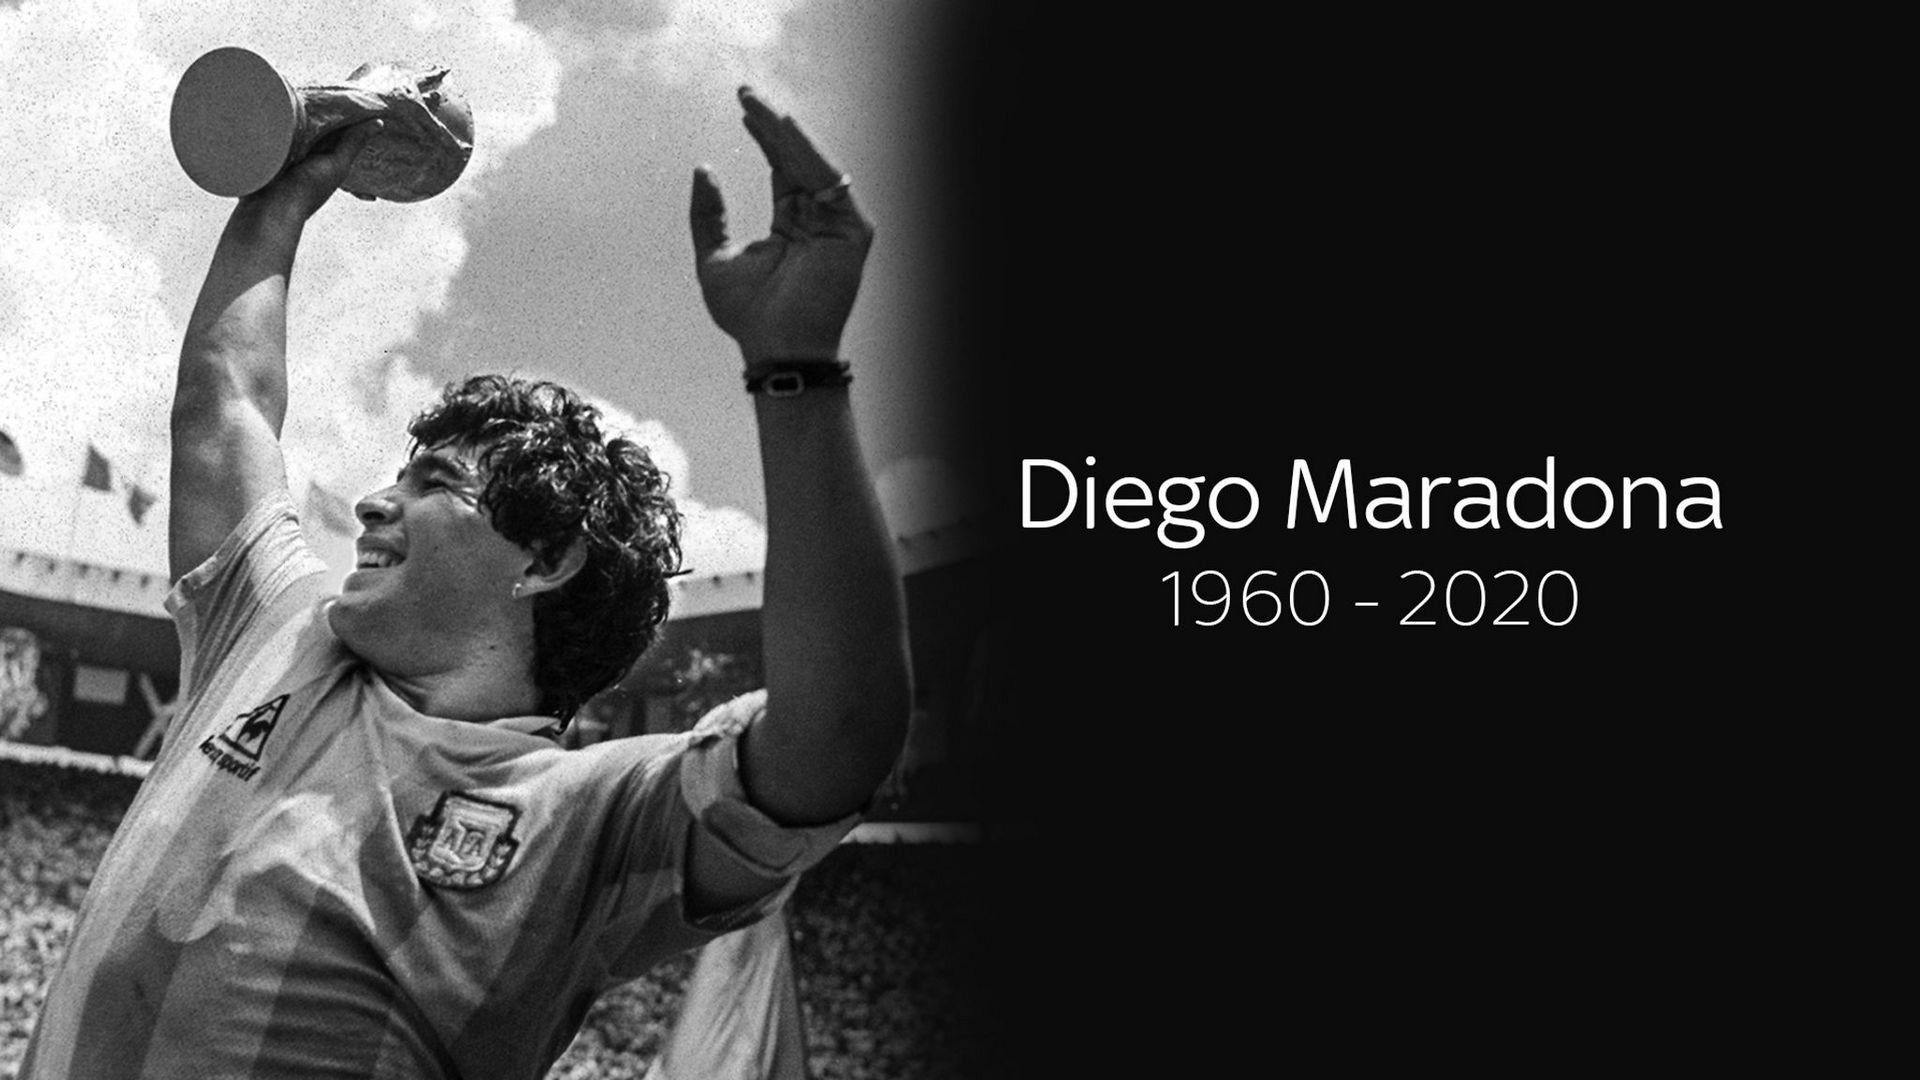 Diego Maradona - What famous soccer player died recently